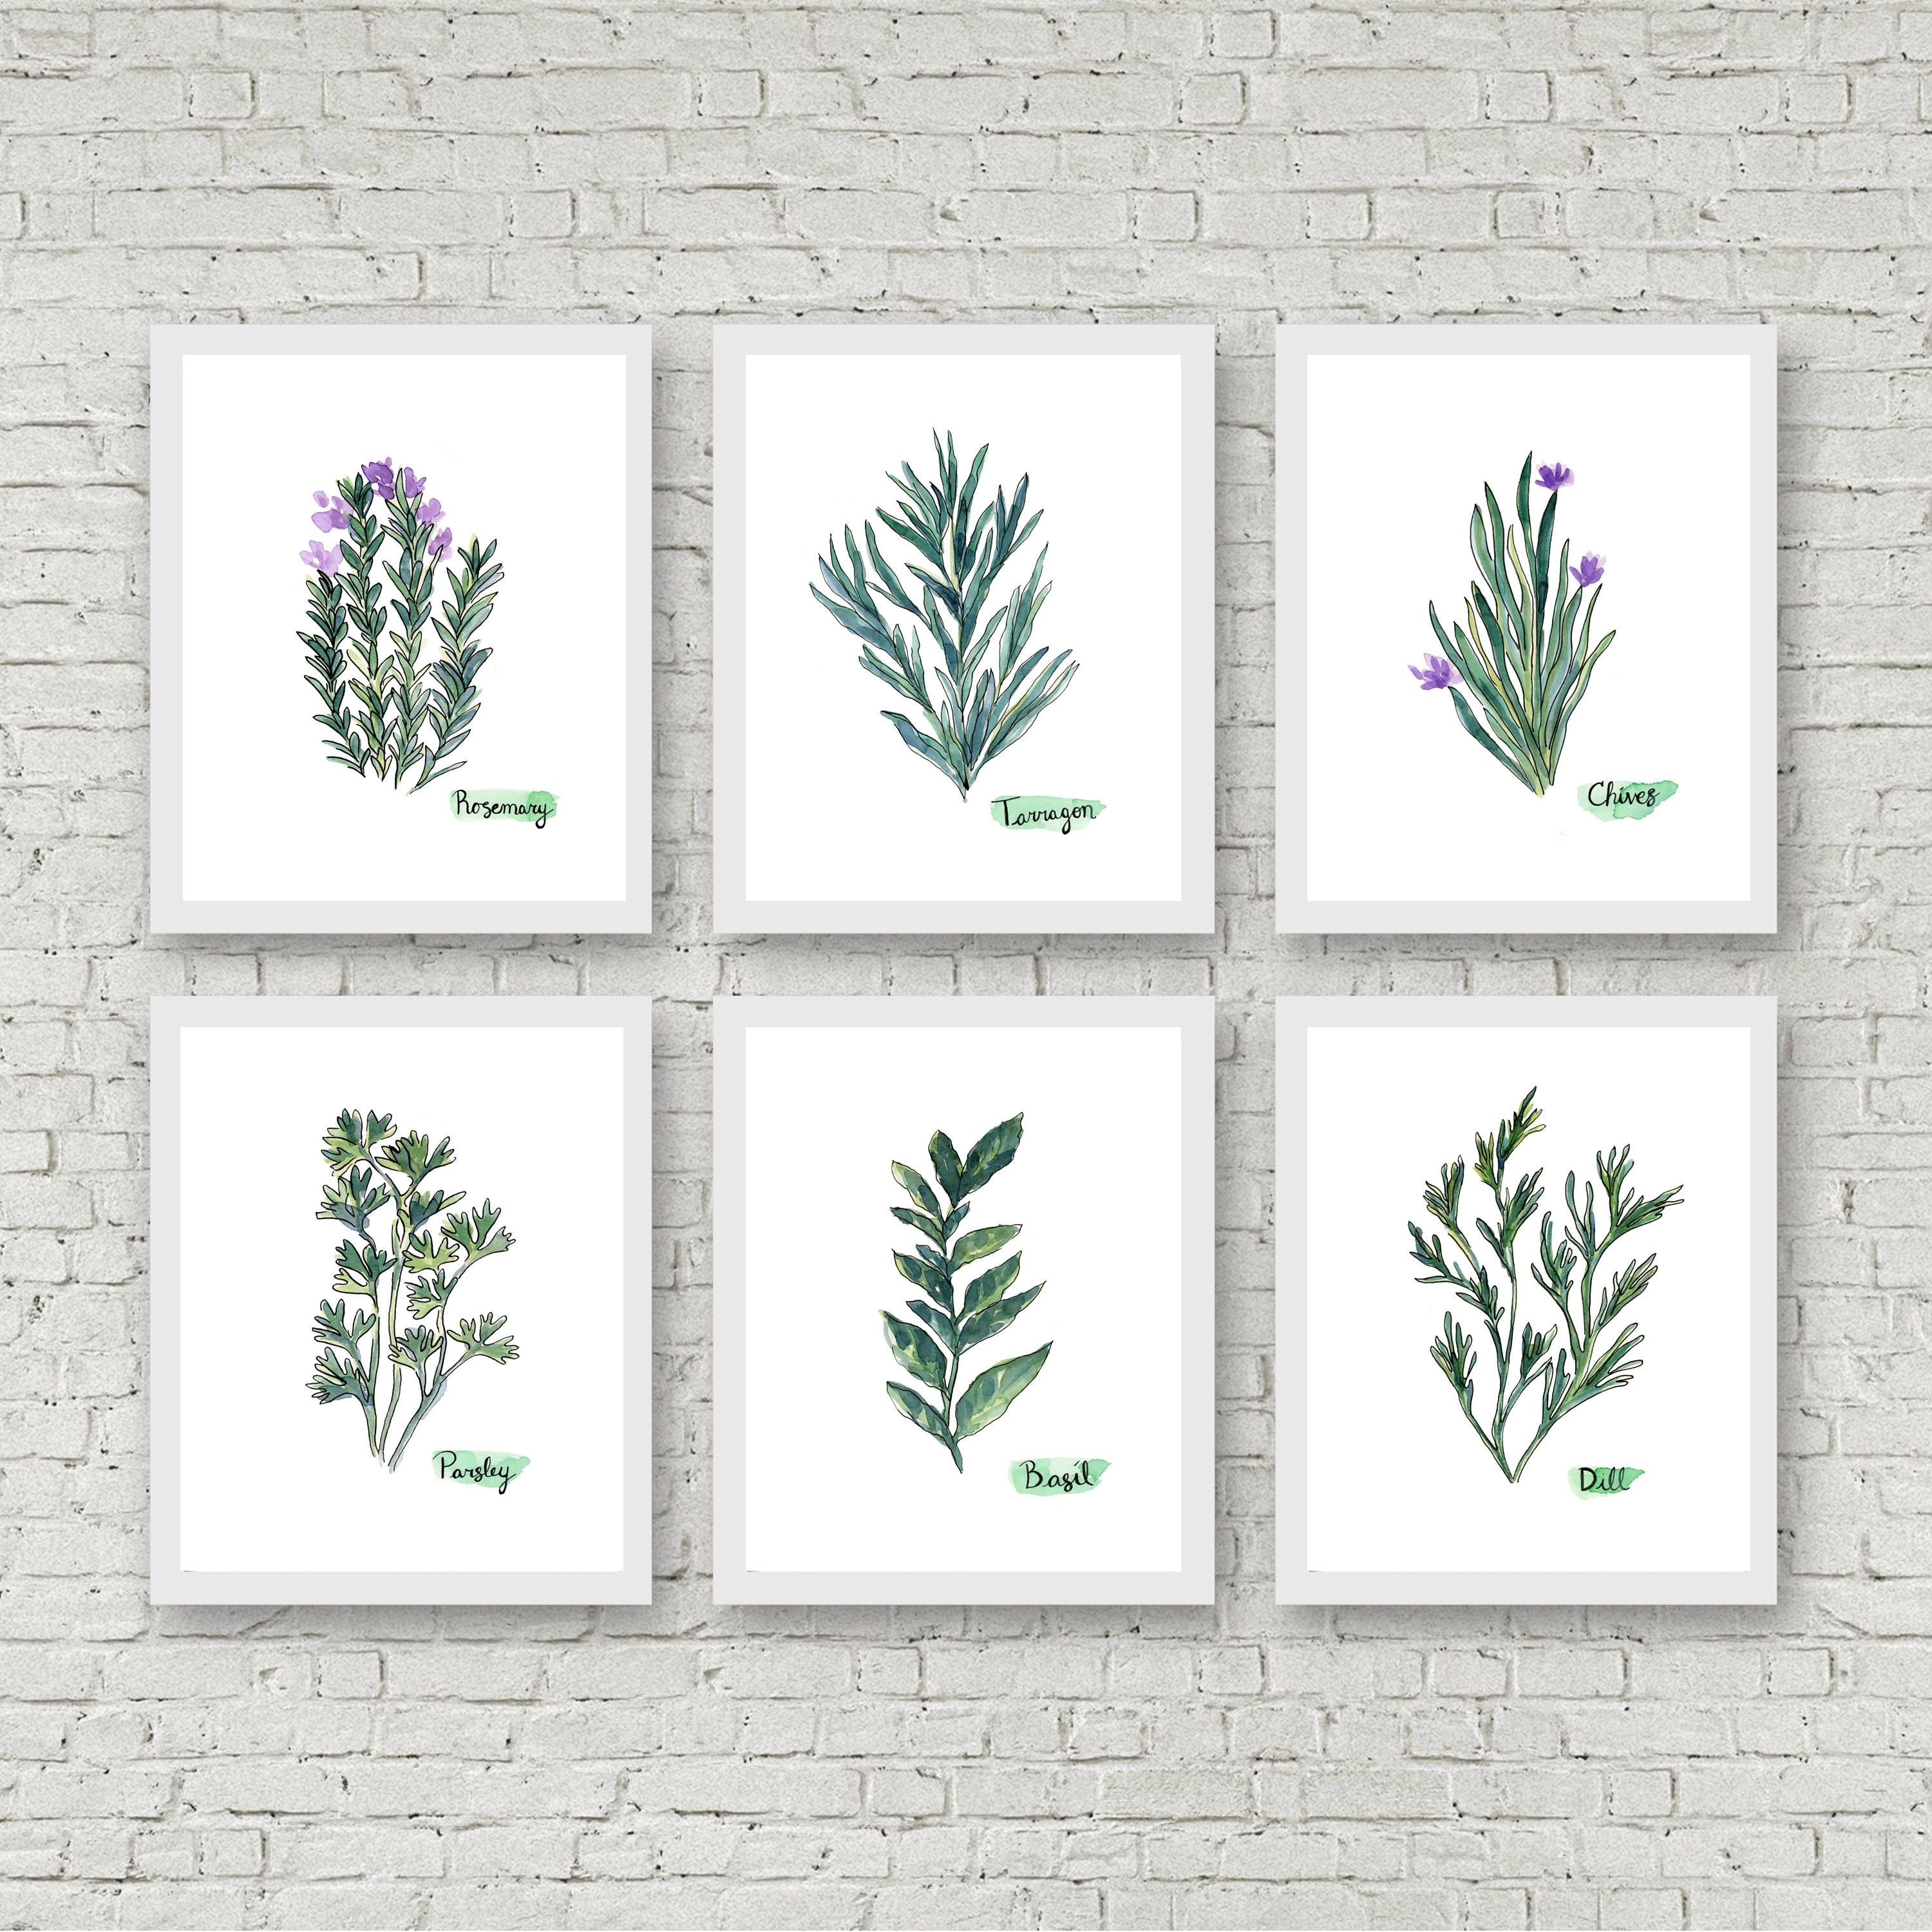 Watercolor Herb Print Set Of 6 Watercolor Green Botanical Prints Within Herb Wall Art (View 13 of 20)